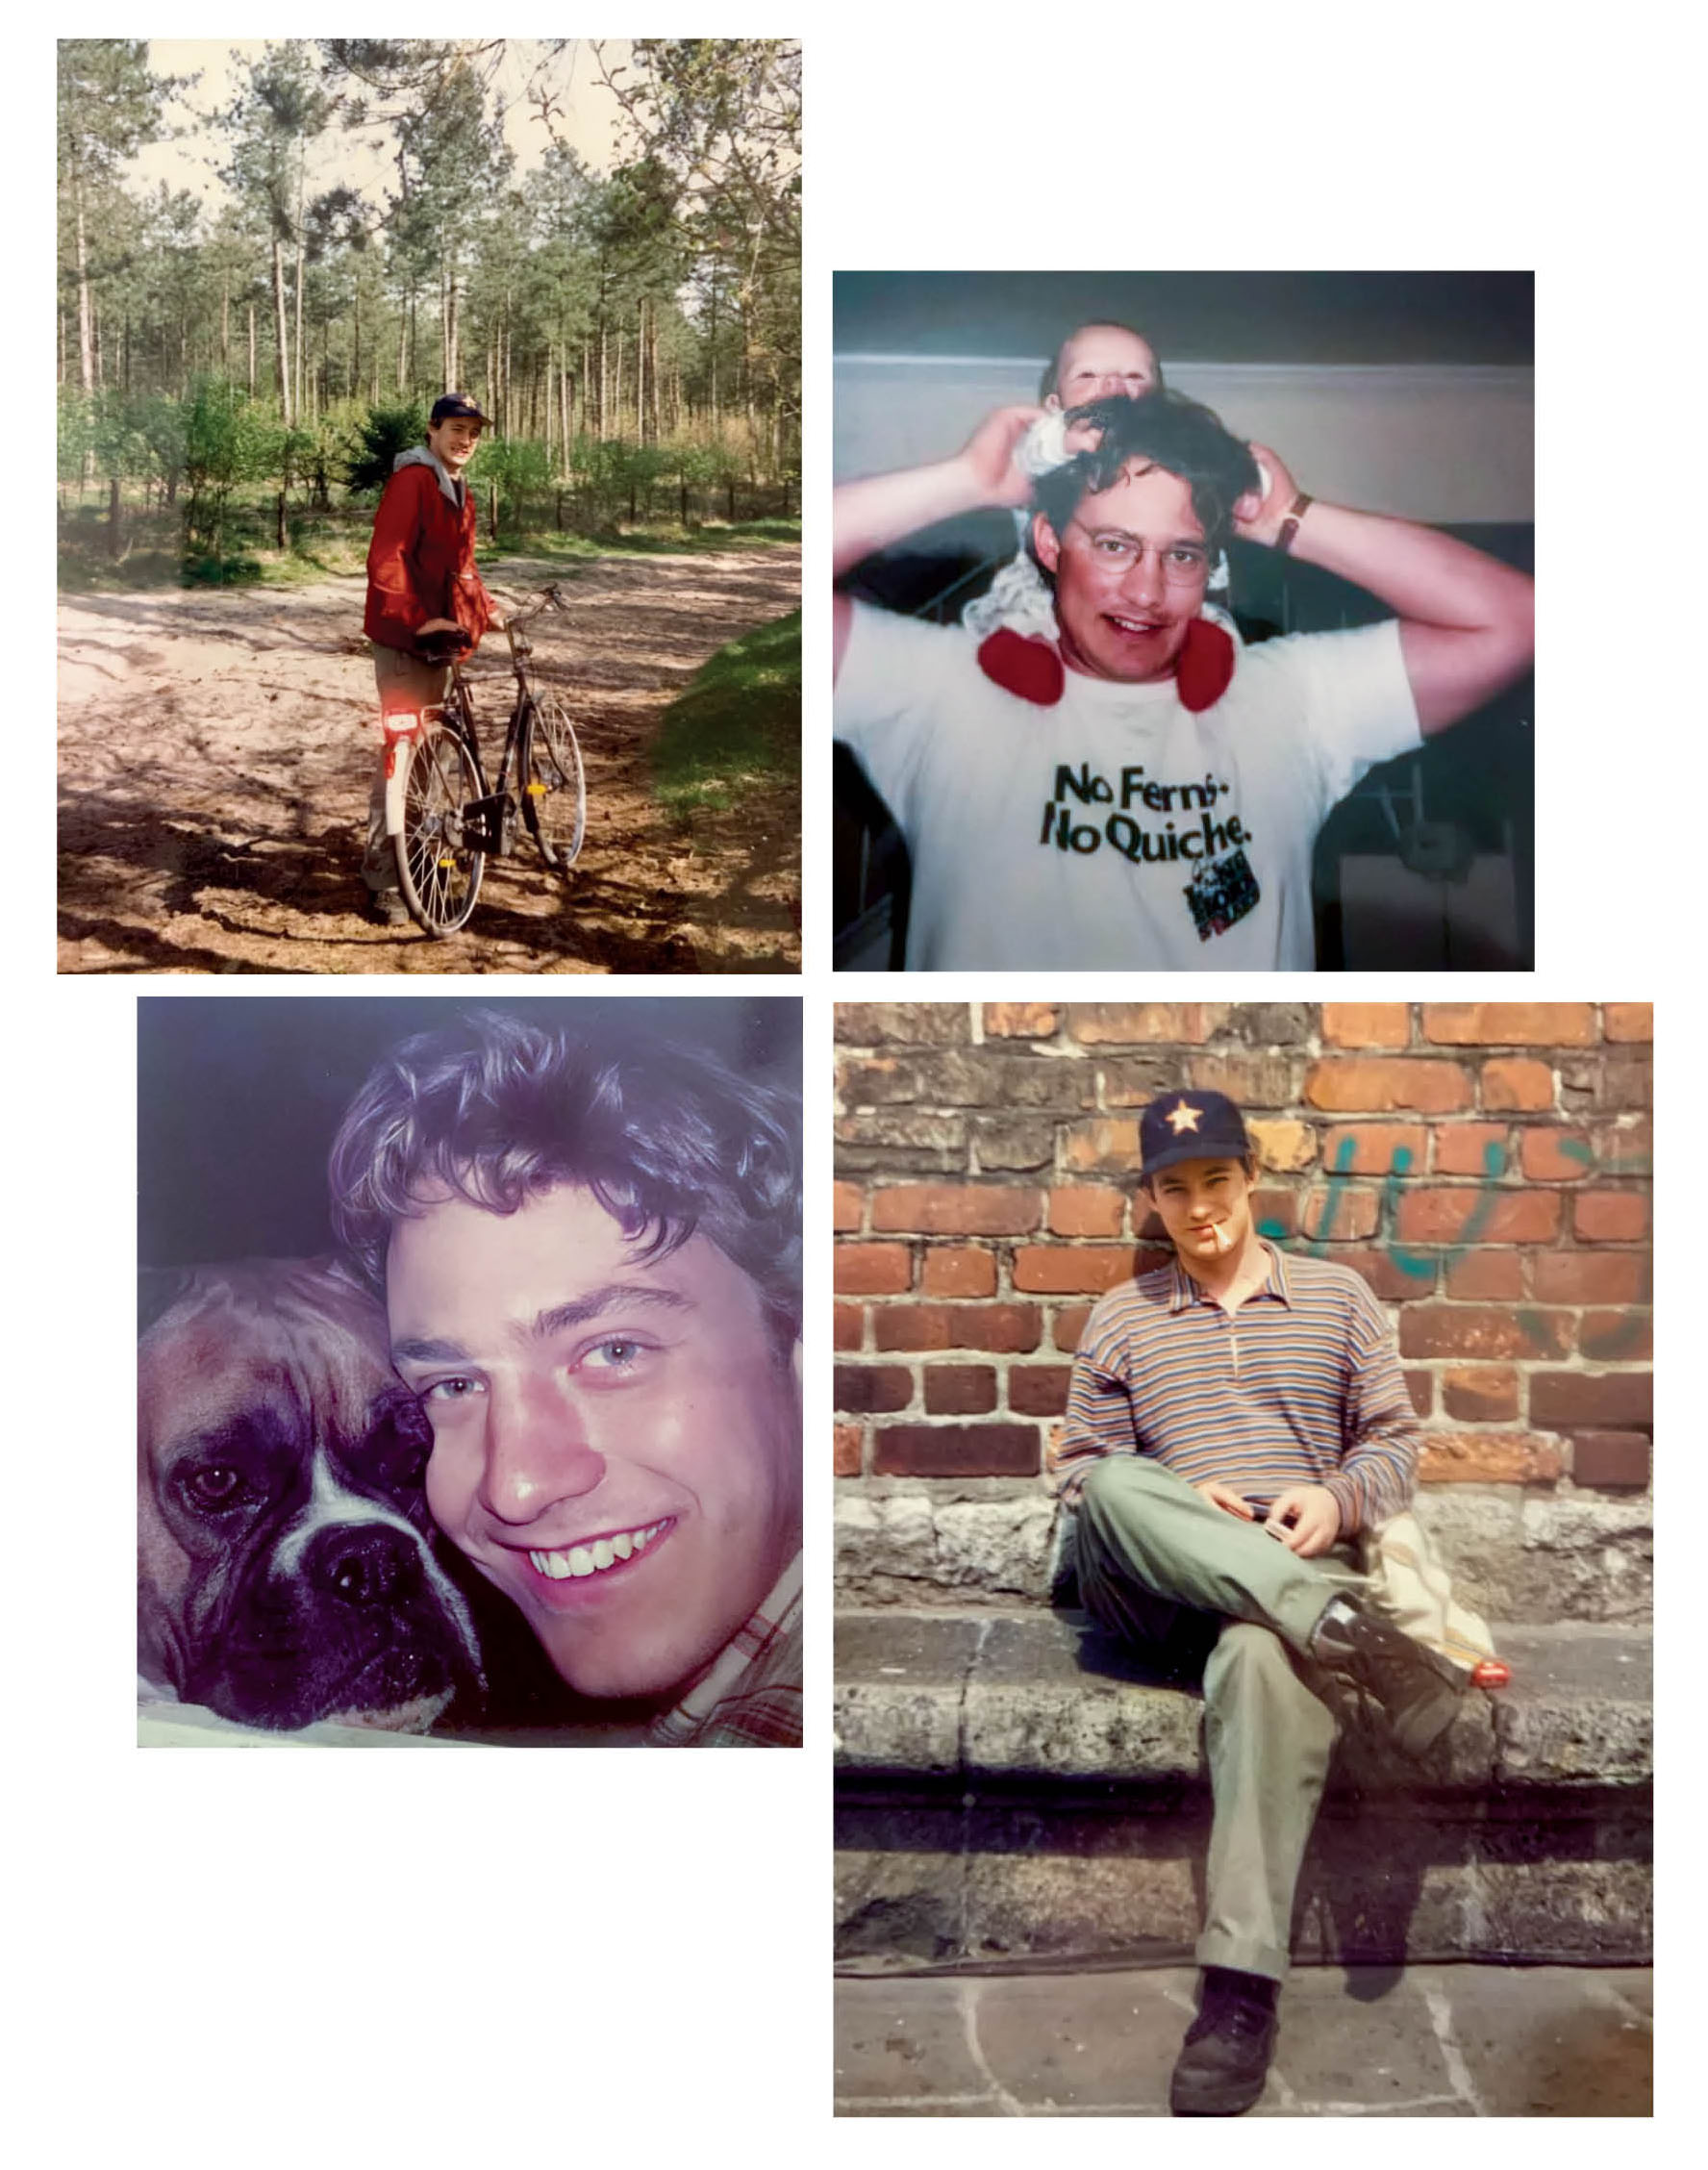 A collage of images of John Nova Lomax, including him riding a bicycle, holding a baby, posing with a dog, and sitting in front of a brick wall